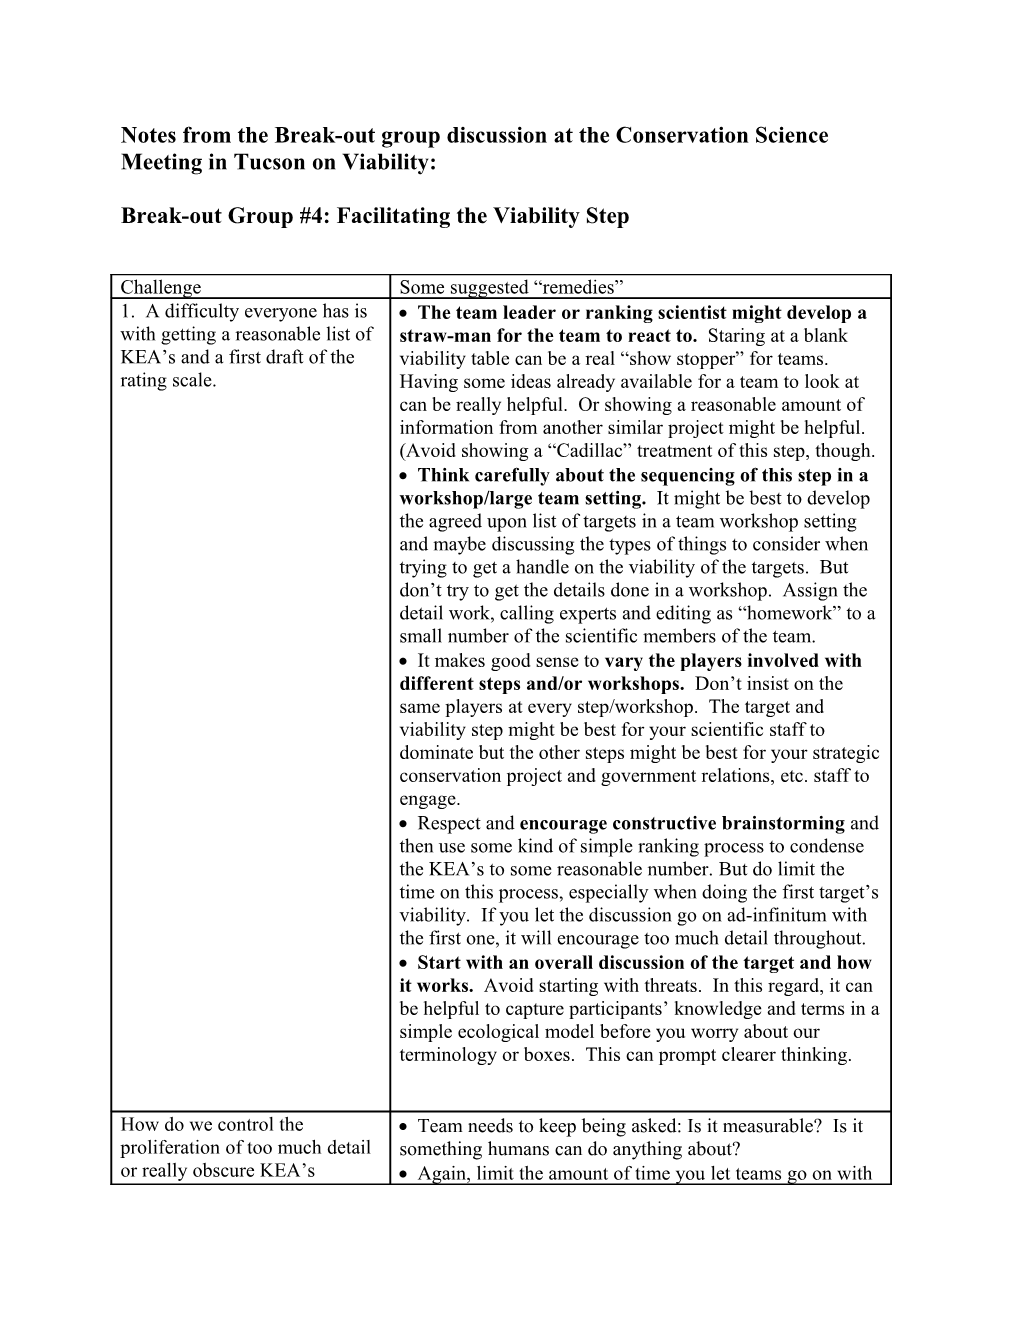 Break-Out Group #4: Facilitating the Viability Step